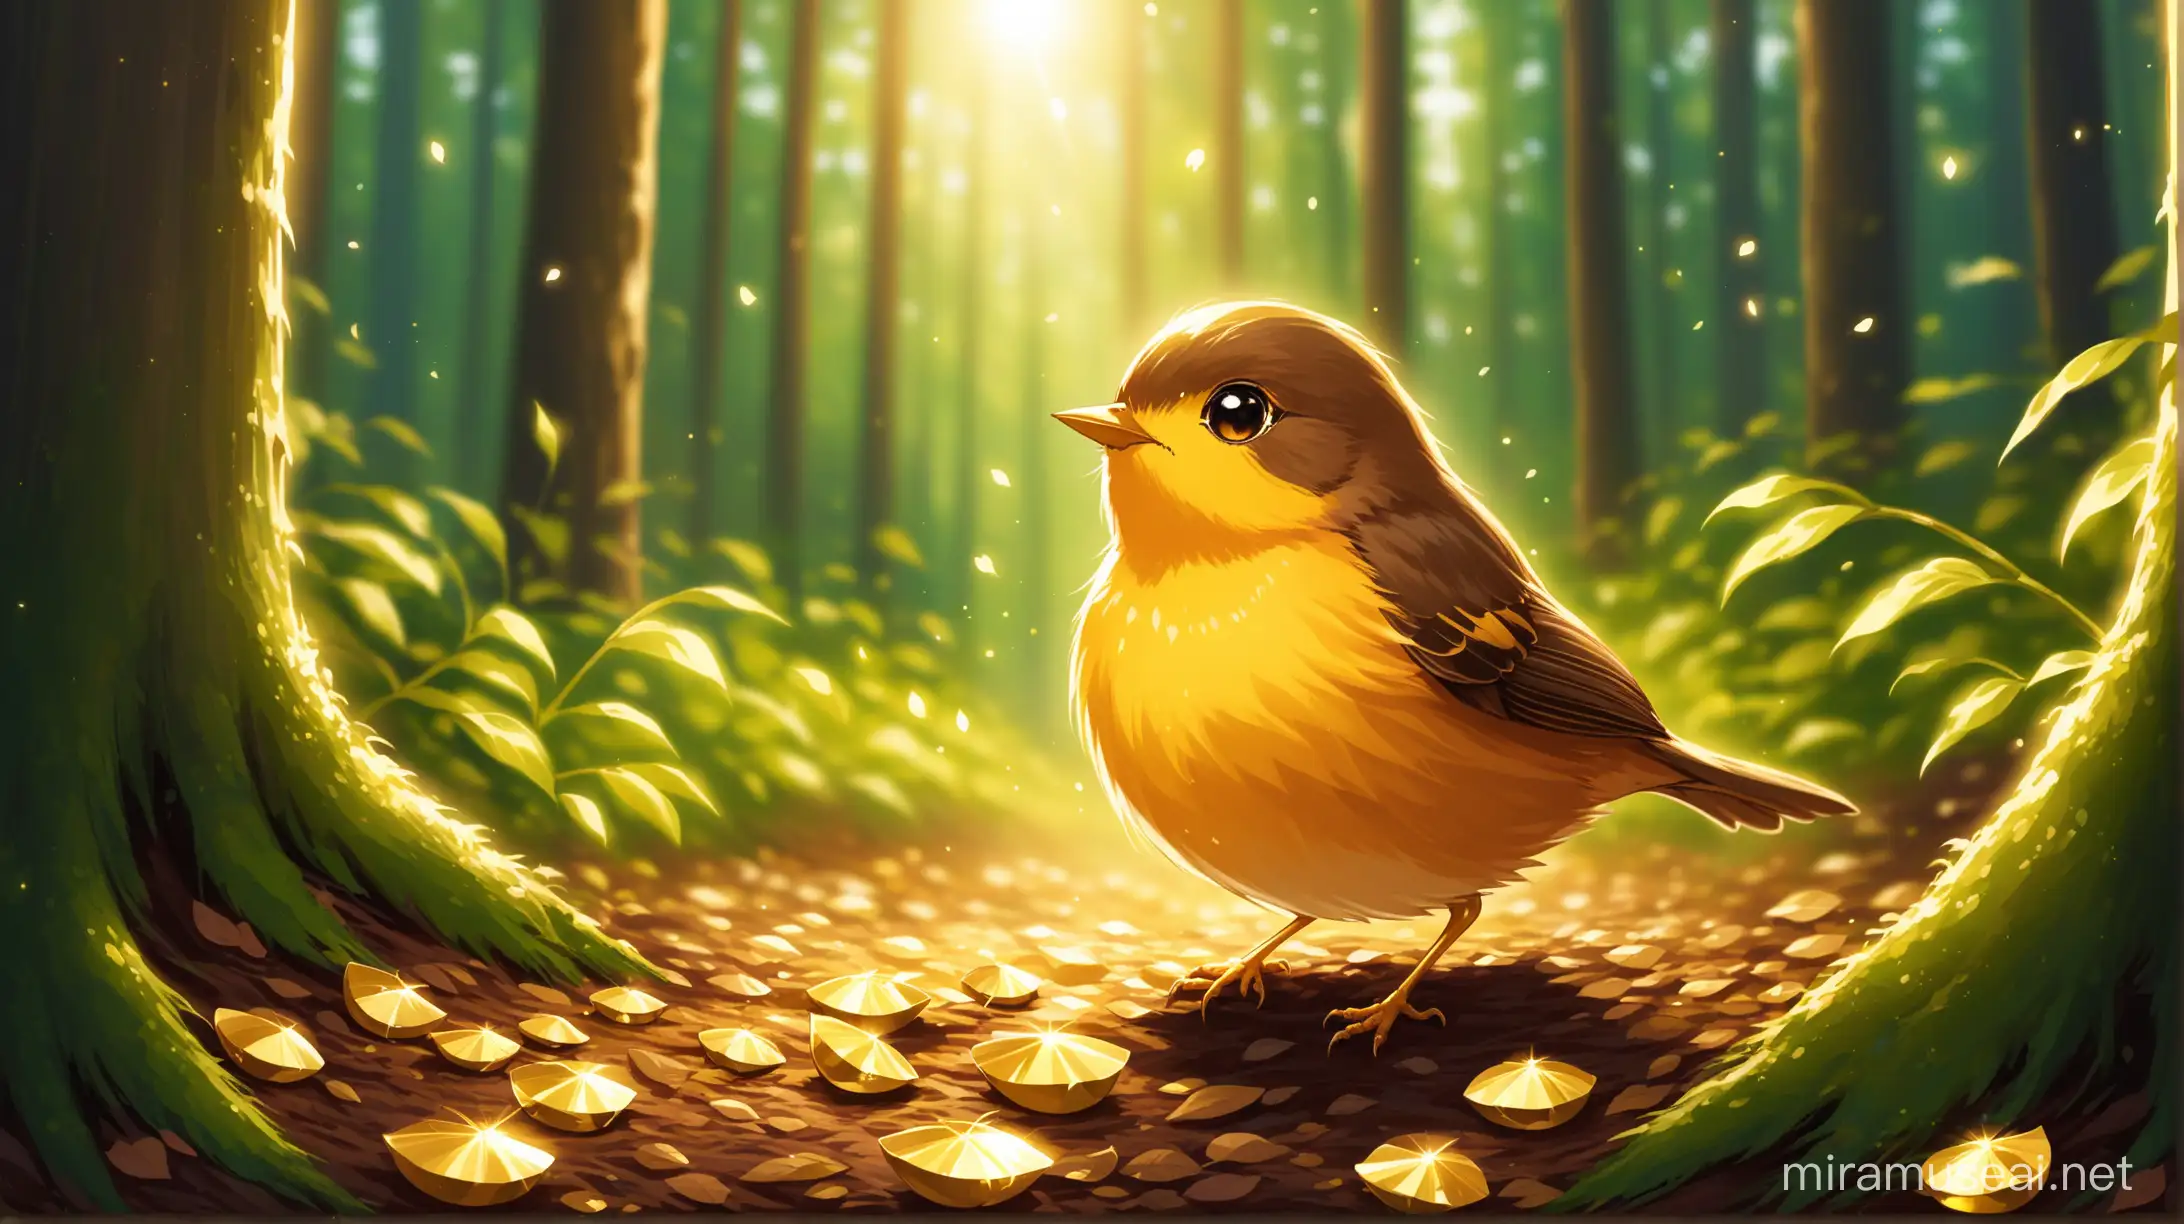 A little bird eyes are wide with surprise as she looks down at a gleaming little piece of gold on the forest floor.